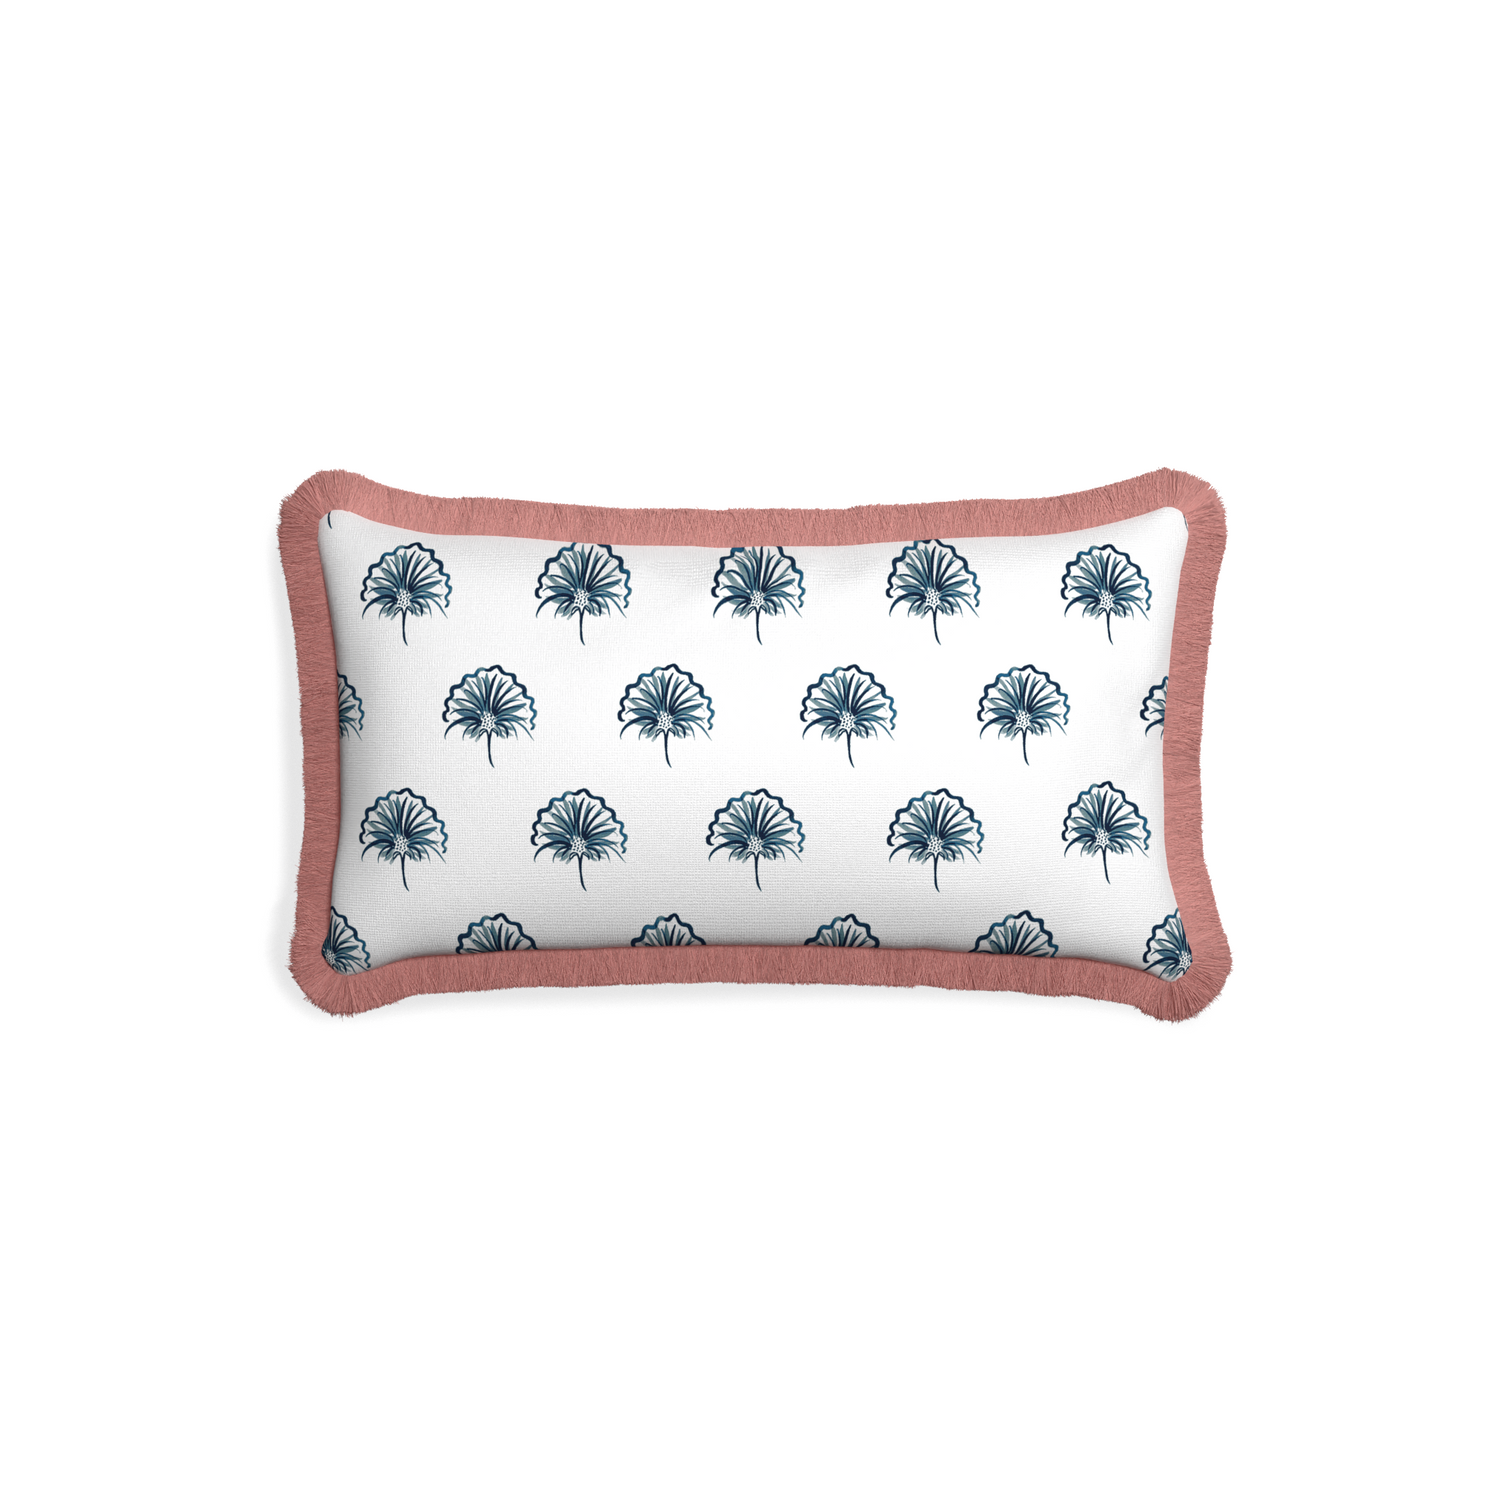 Petite-lumbar penelope midnight custom floral navypillow with d fringe on white background